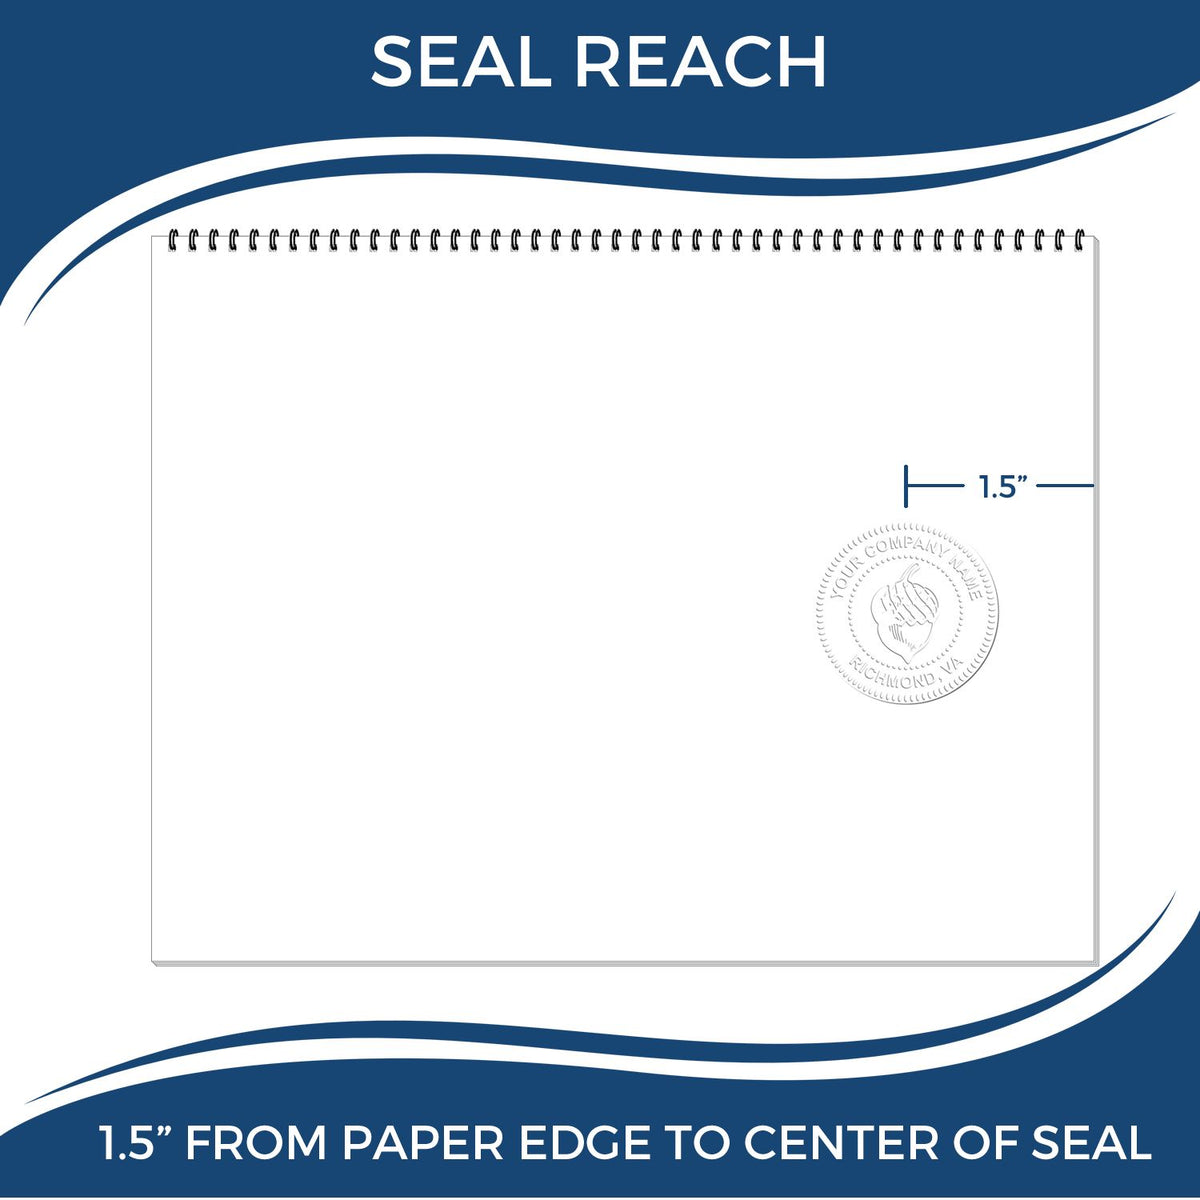 An infographic showing the seal reach which is represented by a ruler and a miniature seal image of the Tennessee Engineer Desk Seal